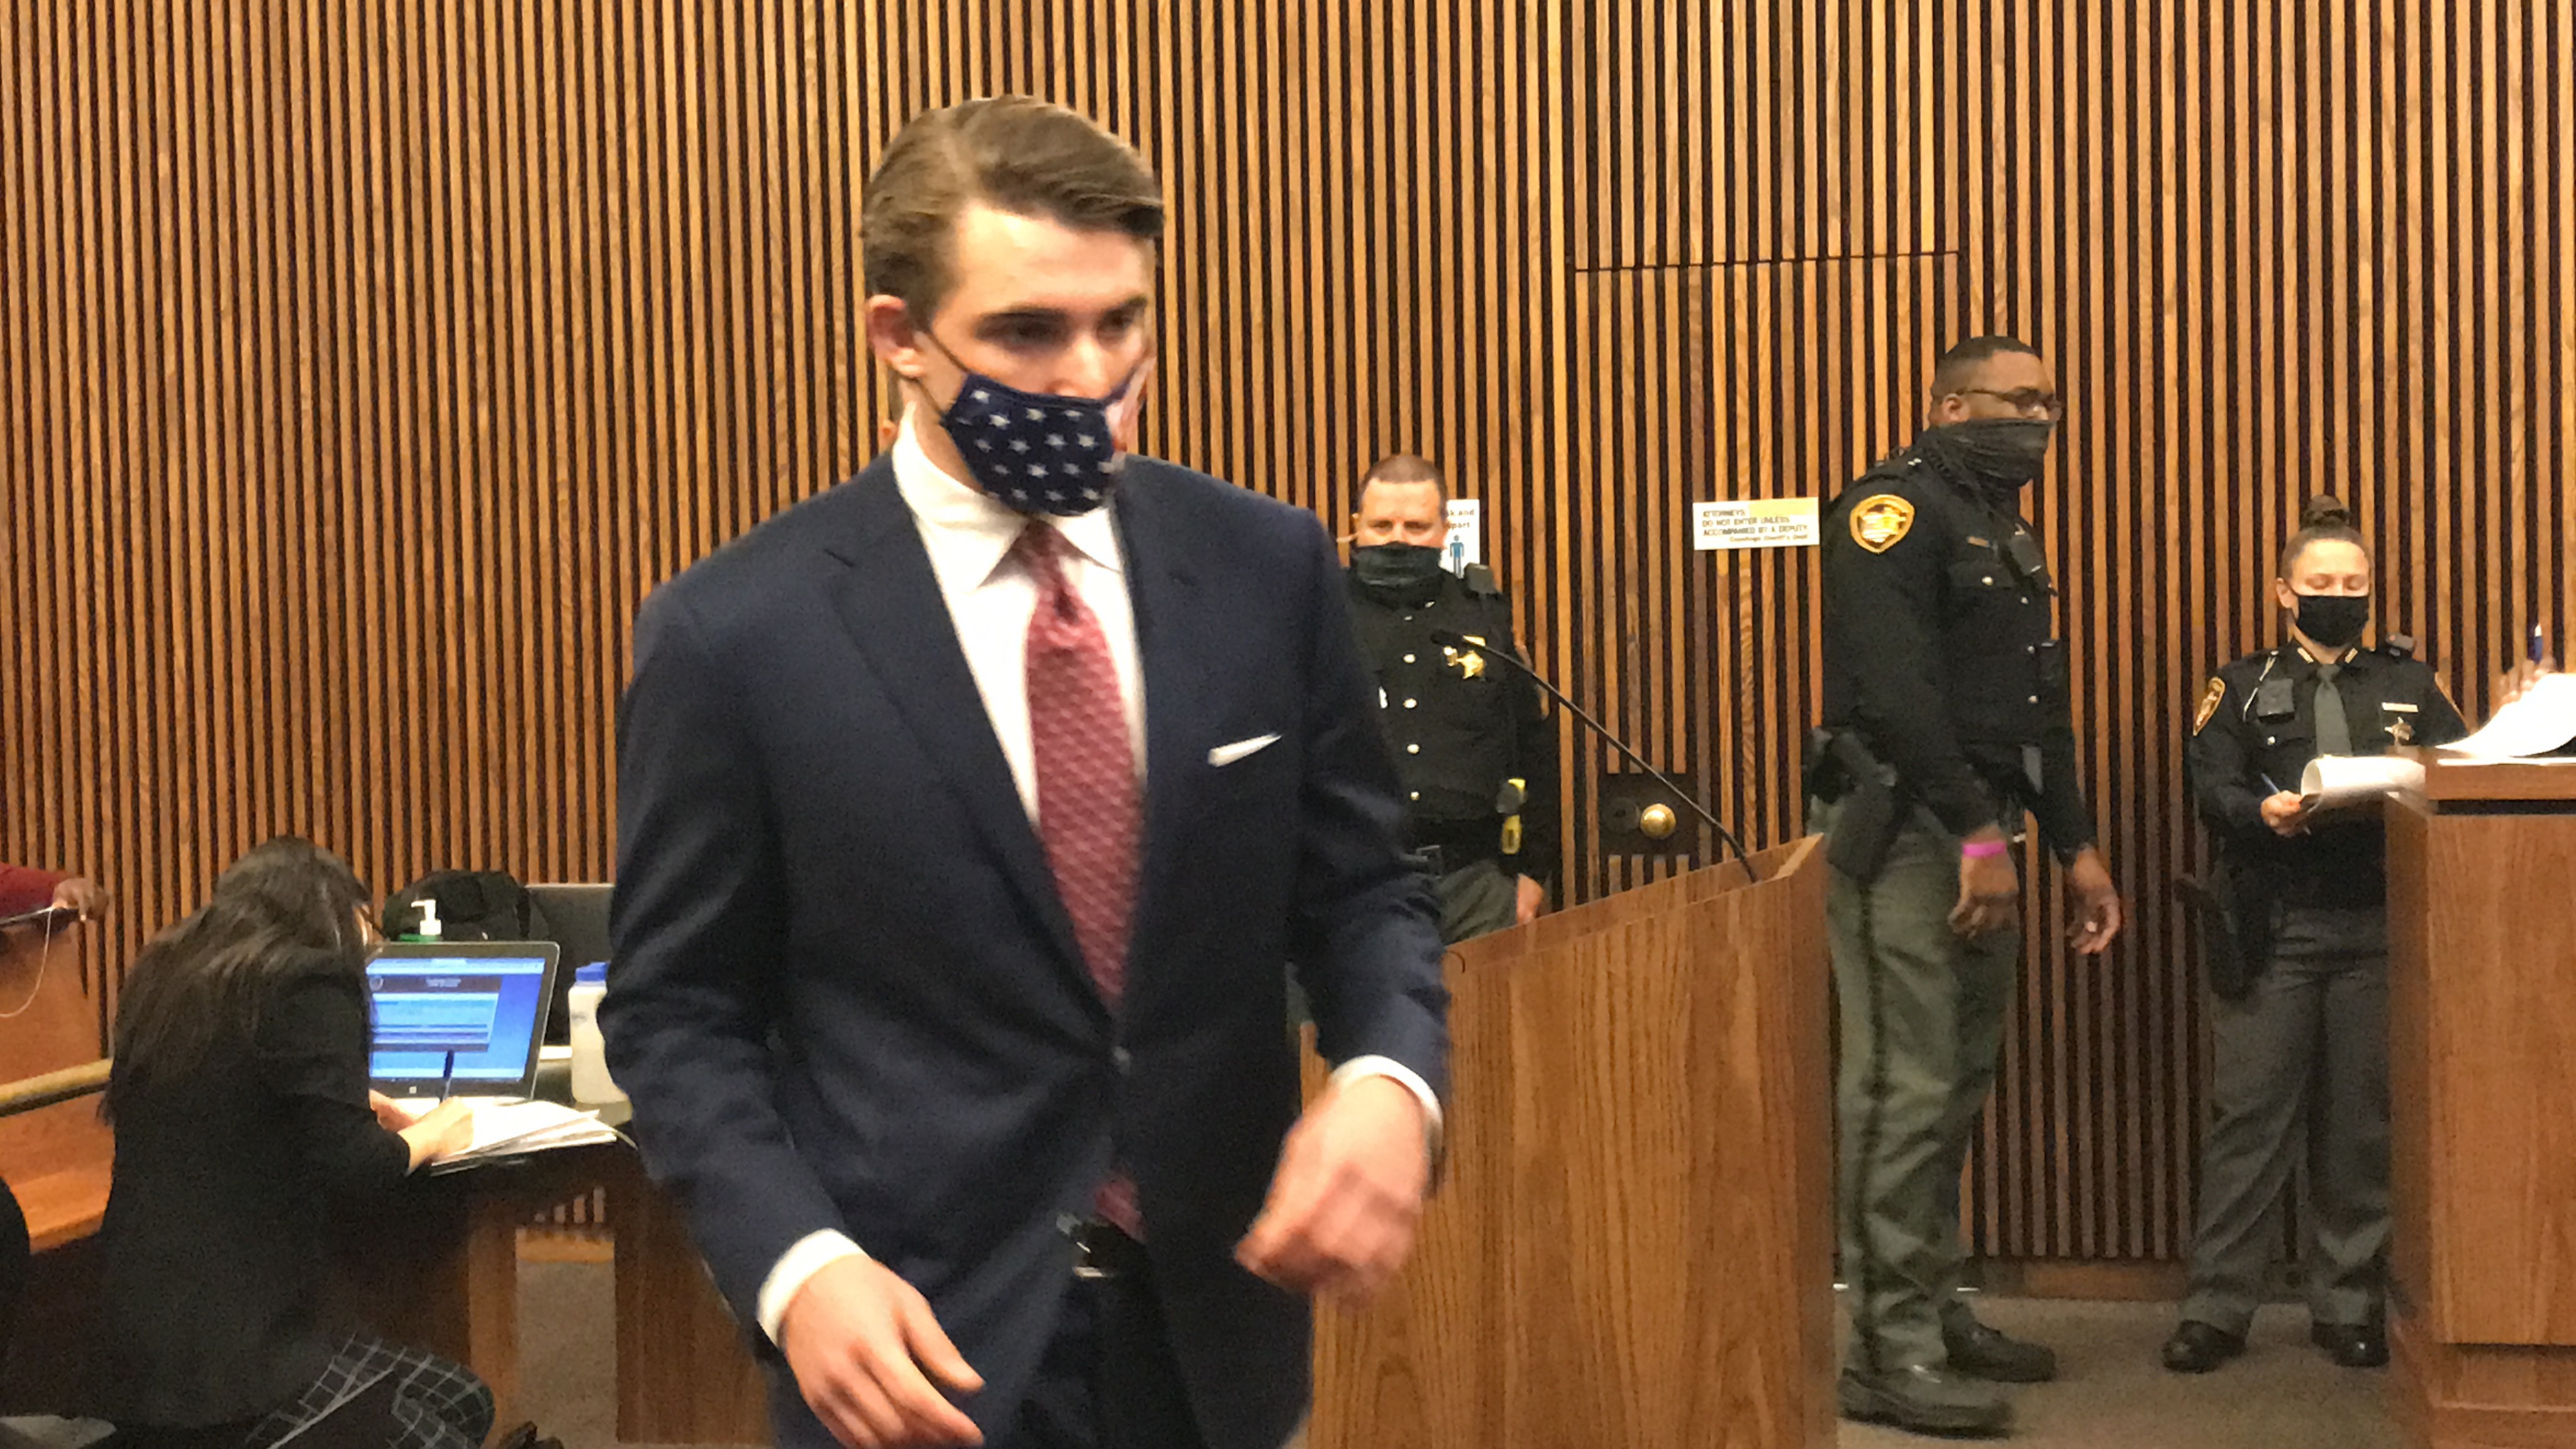 Jacob Wohl in Cuyahoga County Common Pleas Court